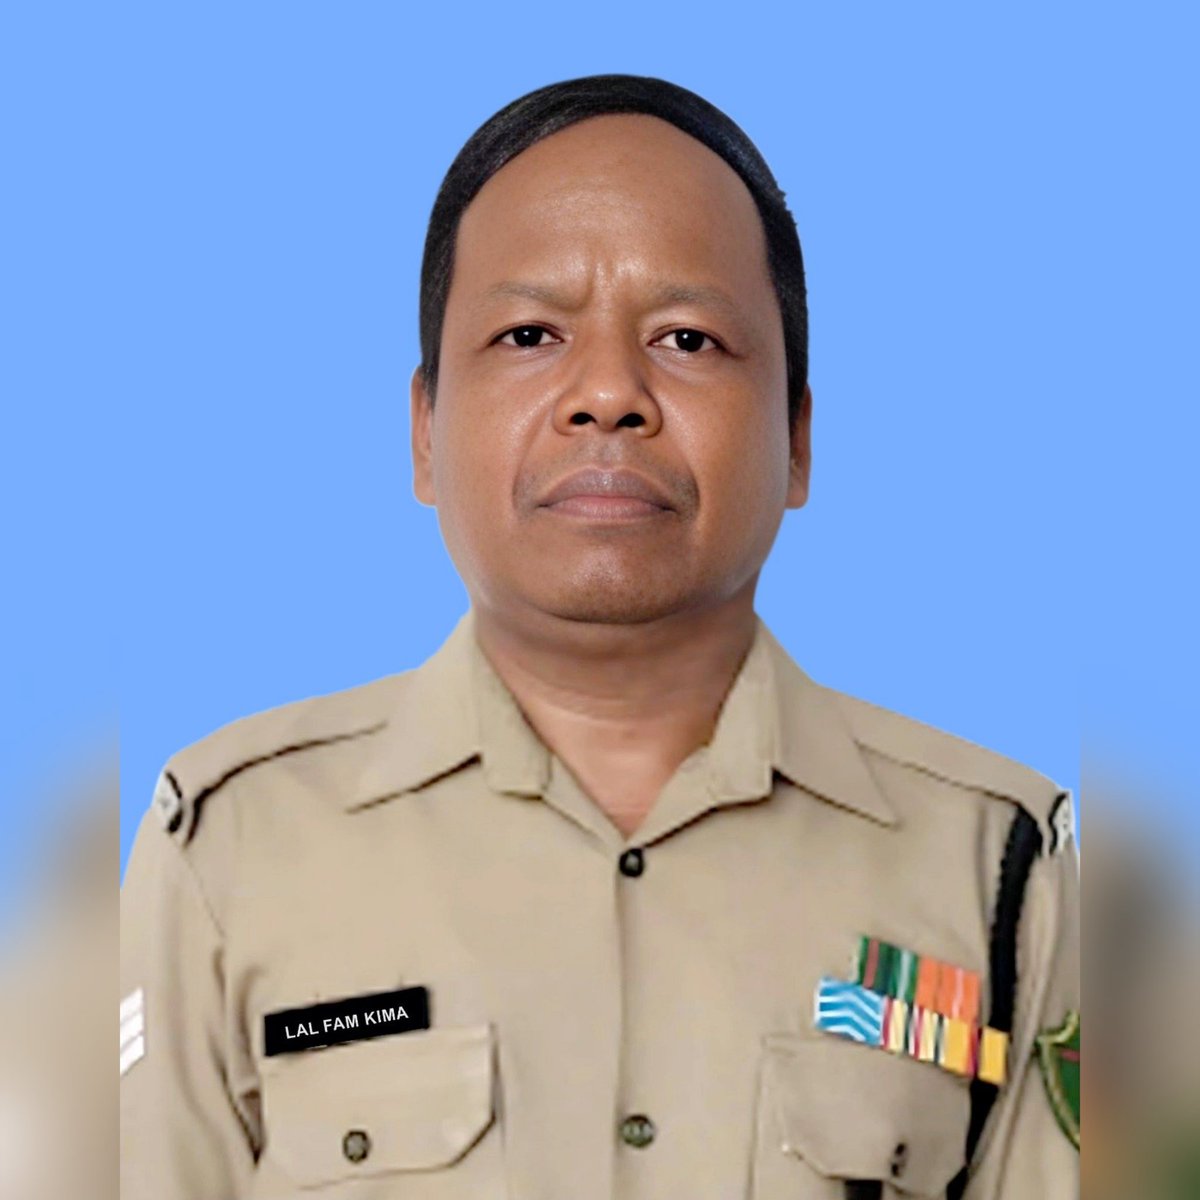 Deeply saddened by the death of the brave soldier Pu Lalfamkima, Head Constable, 148 Bn. BSF; Durtlang North, Mizoram; who was killed in Pakistani firing along the International border in Jammu & Kashmir's Samba district. May the departed soul Rest in Peace. My heartfelt…